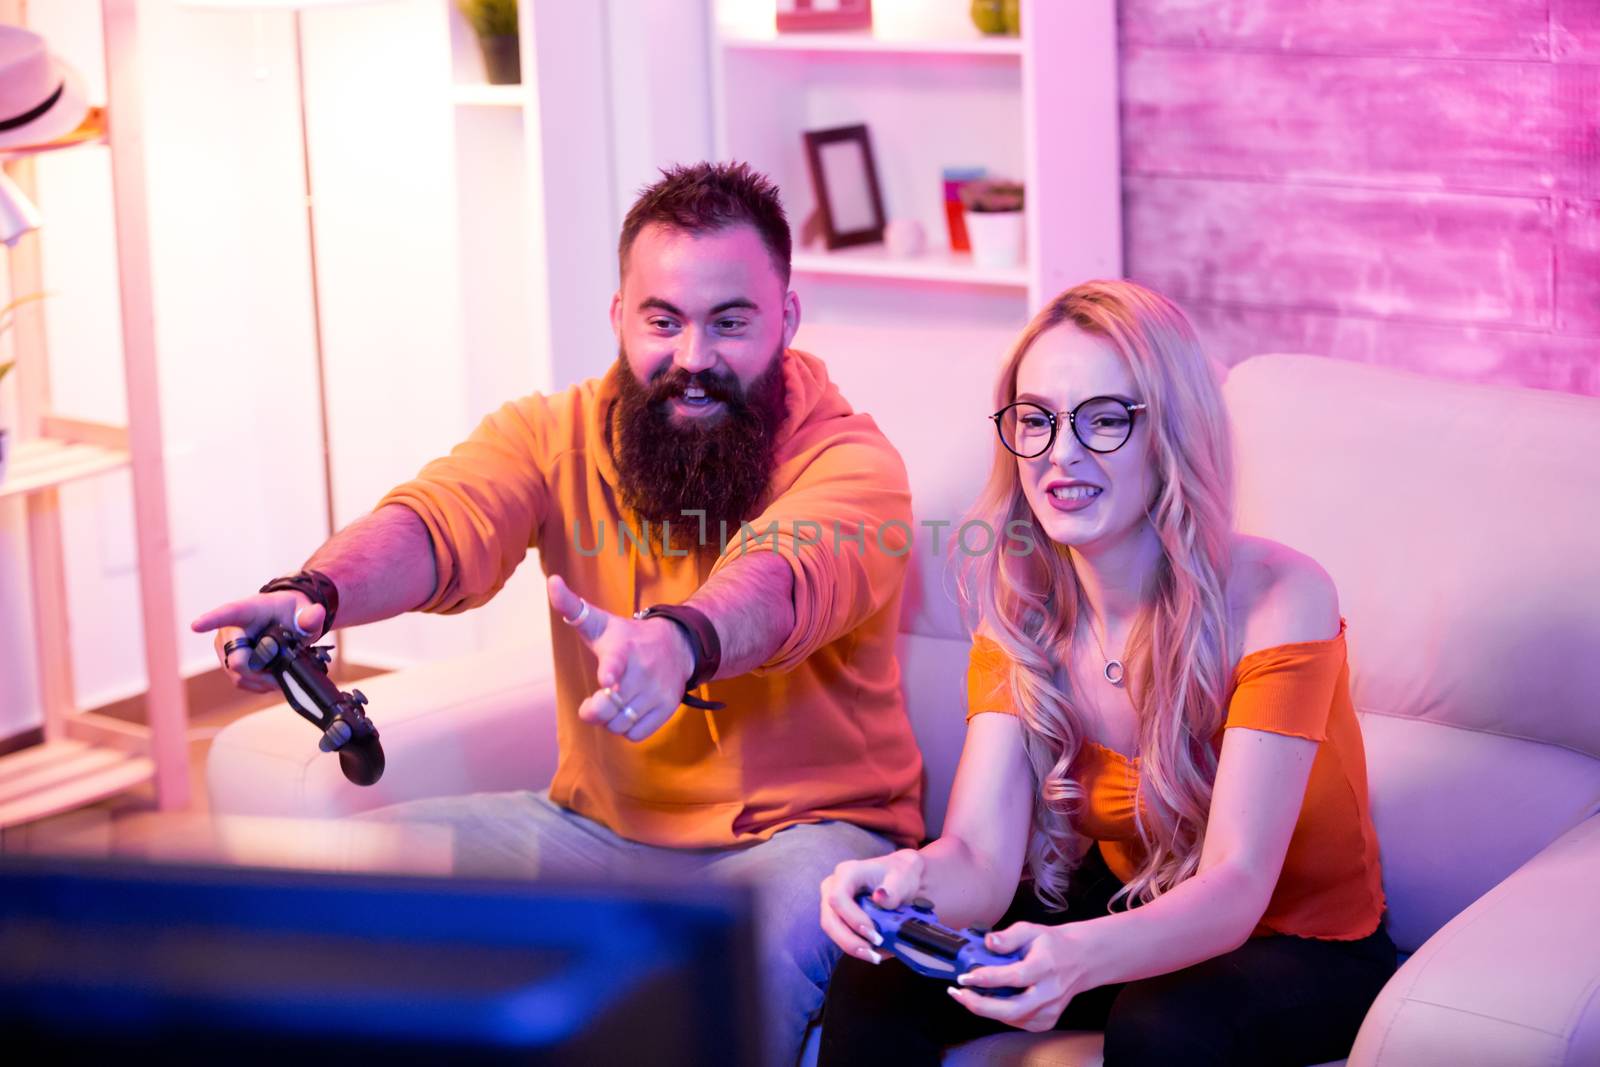 Boyfriend cheering her beautiul girlfriend while she's playing online games using wireless controller. Room with neon light.